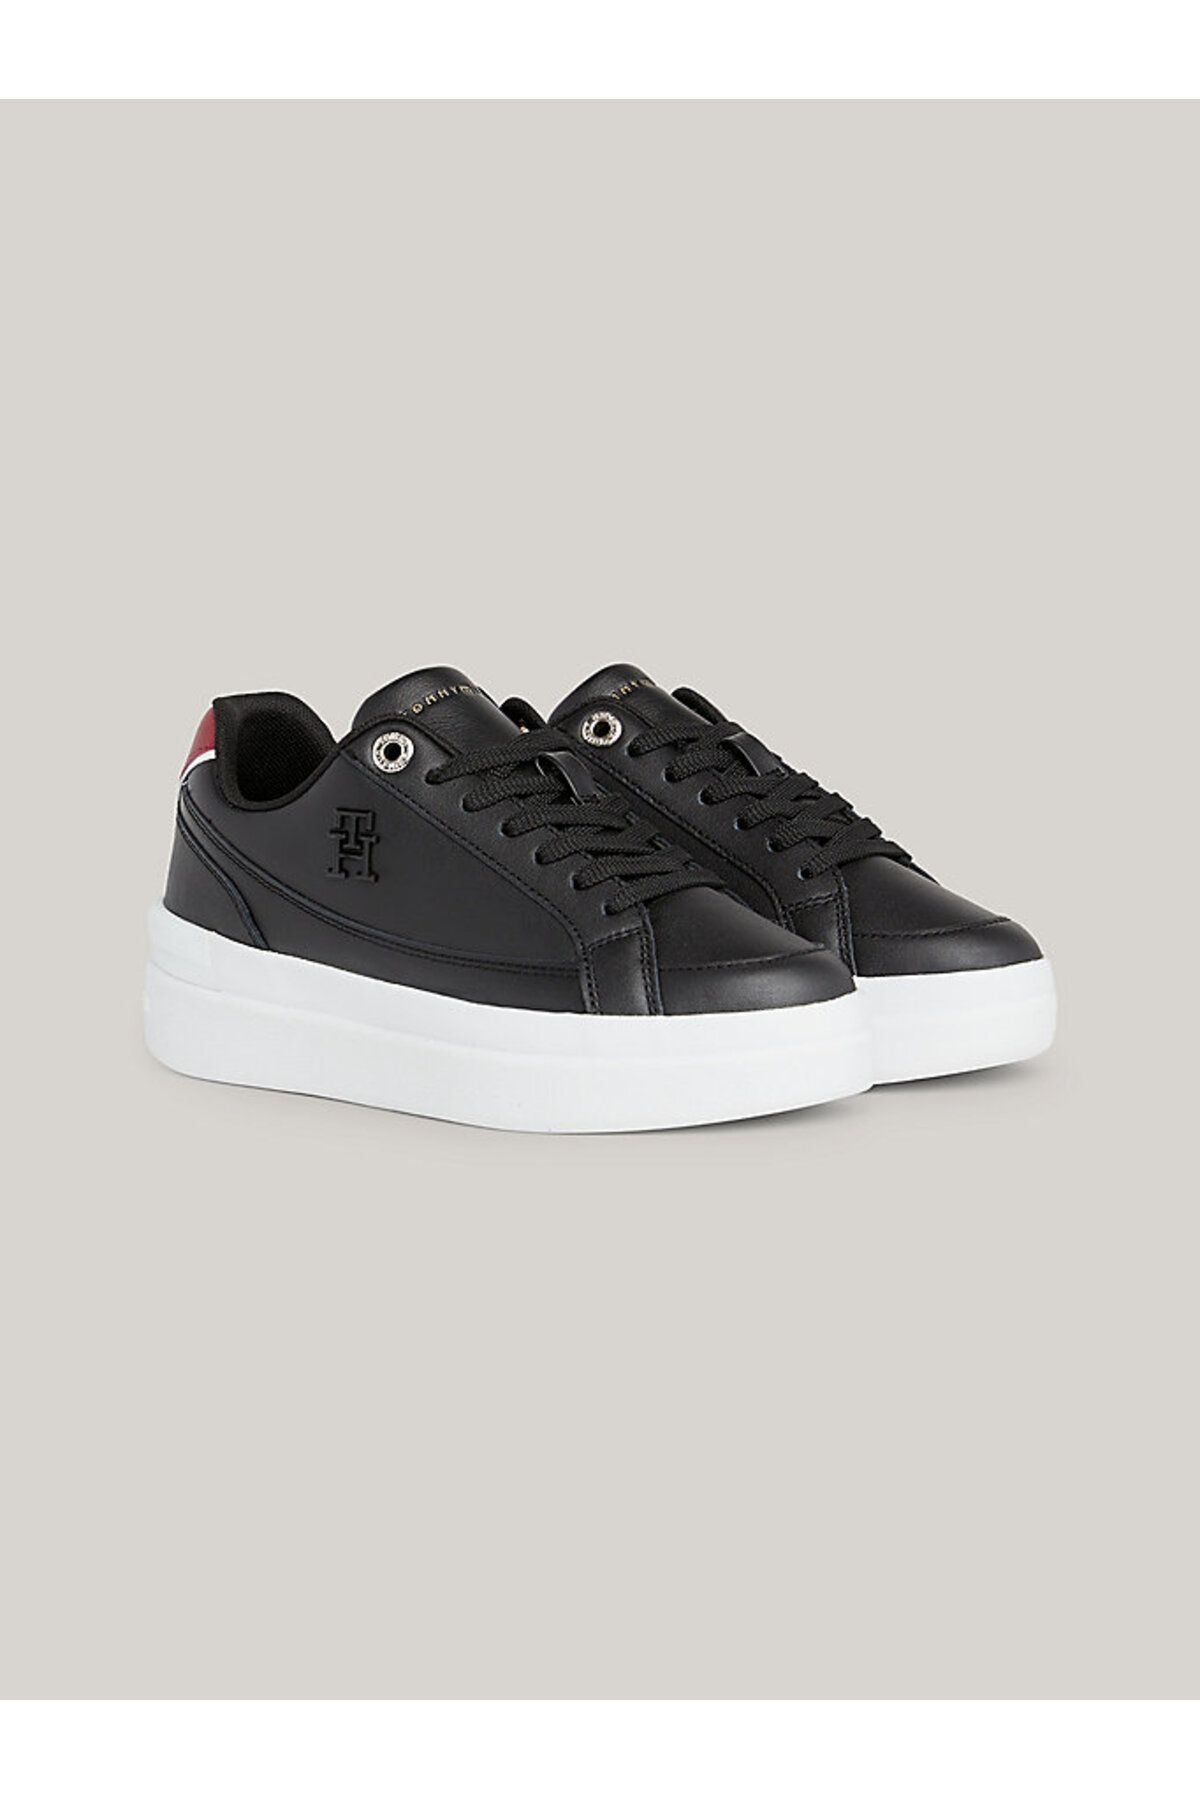 Tommy Hilfiger TH ELEVATED COURT SNEAKER